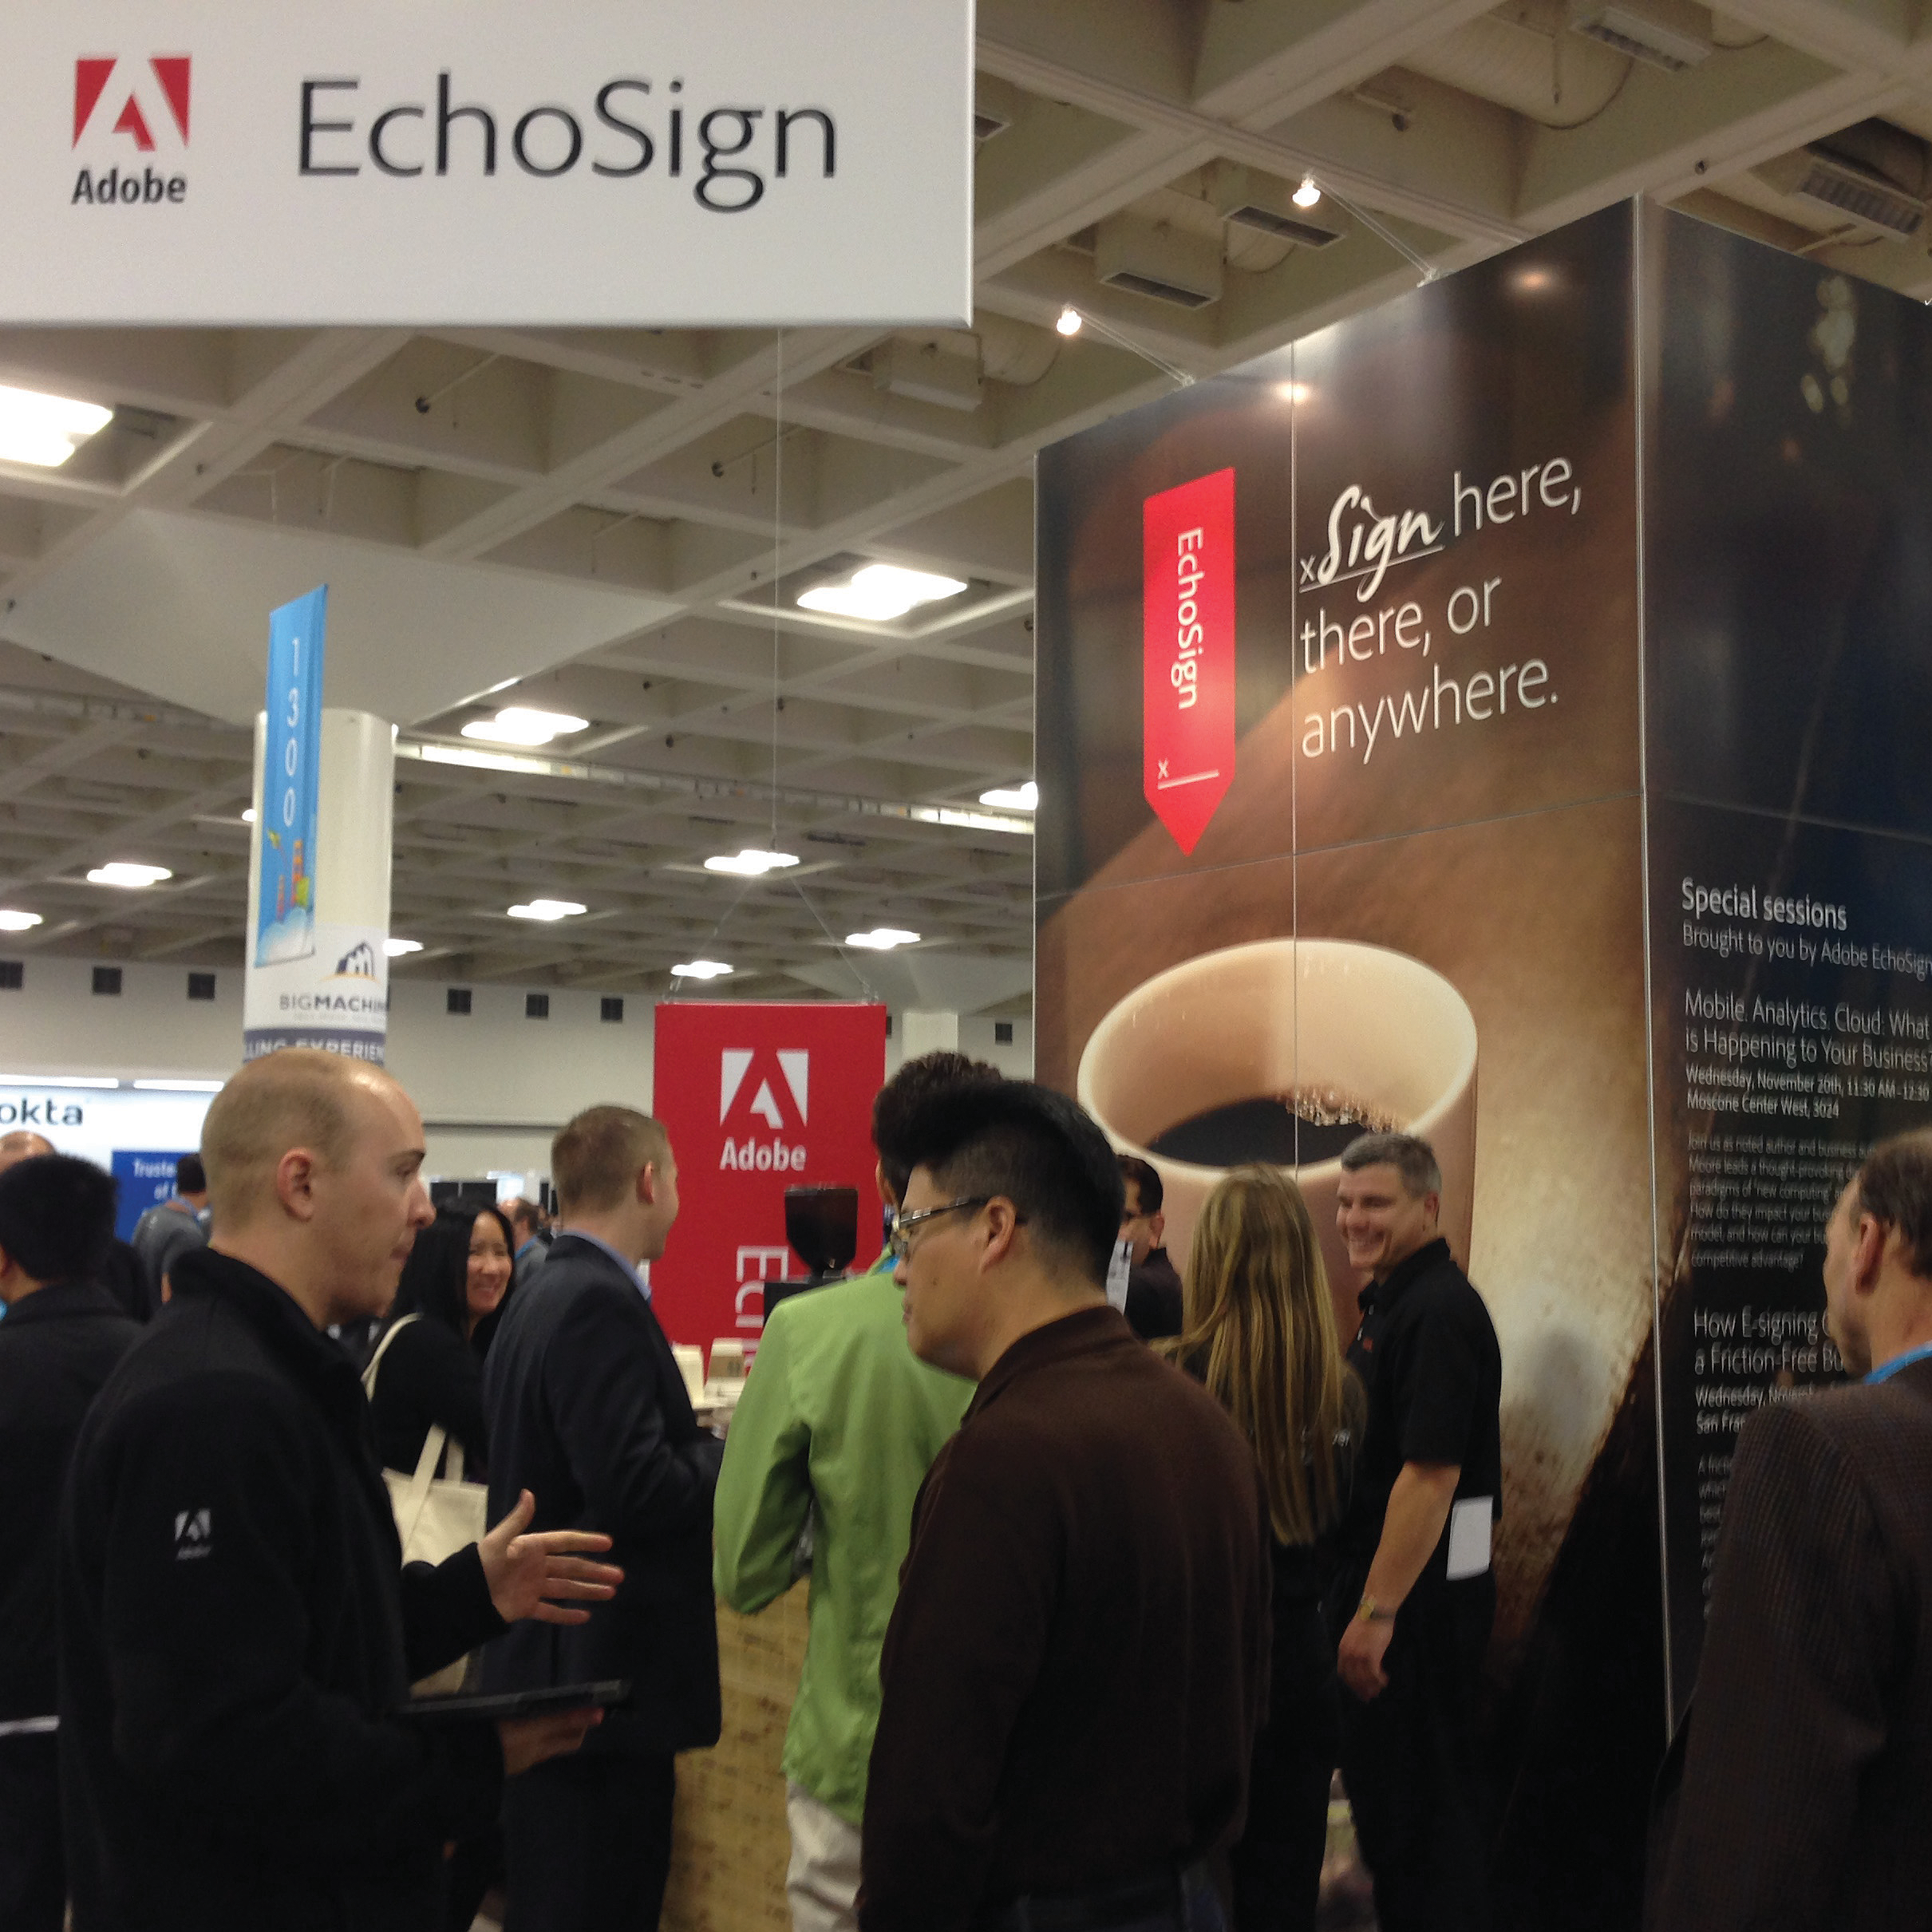 Attendees at DreamForce conference gathered around the Echo Sign booth